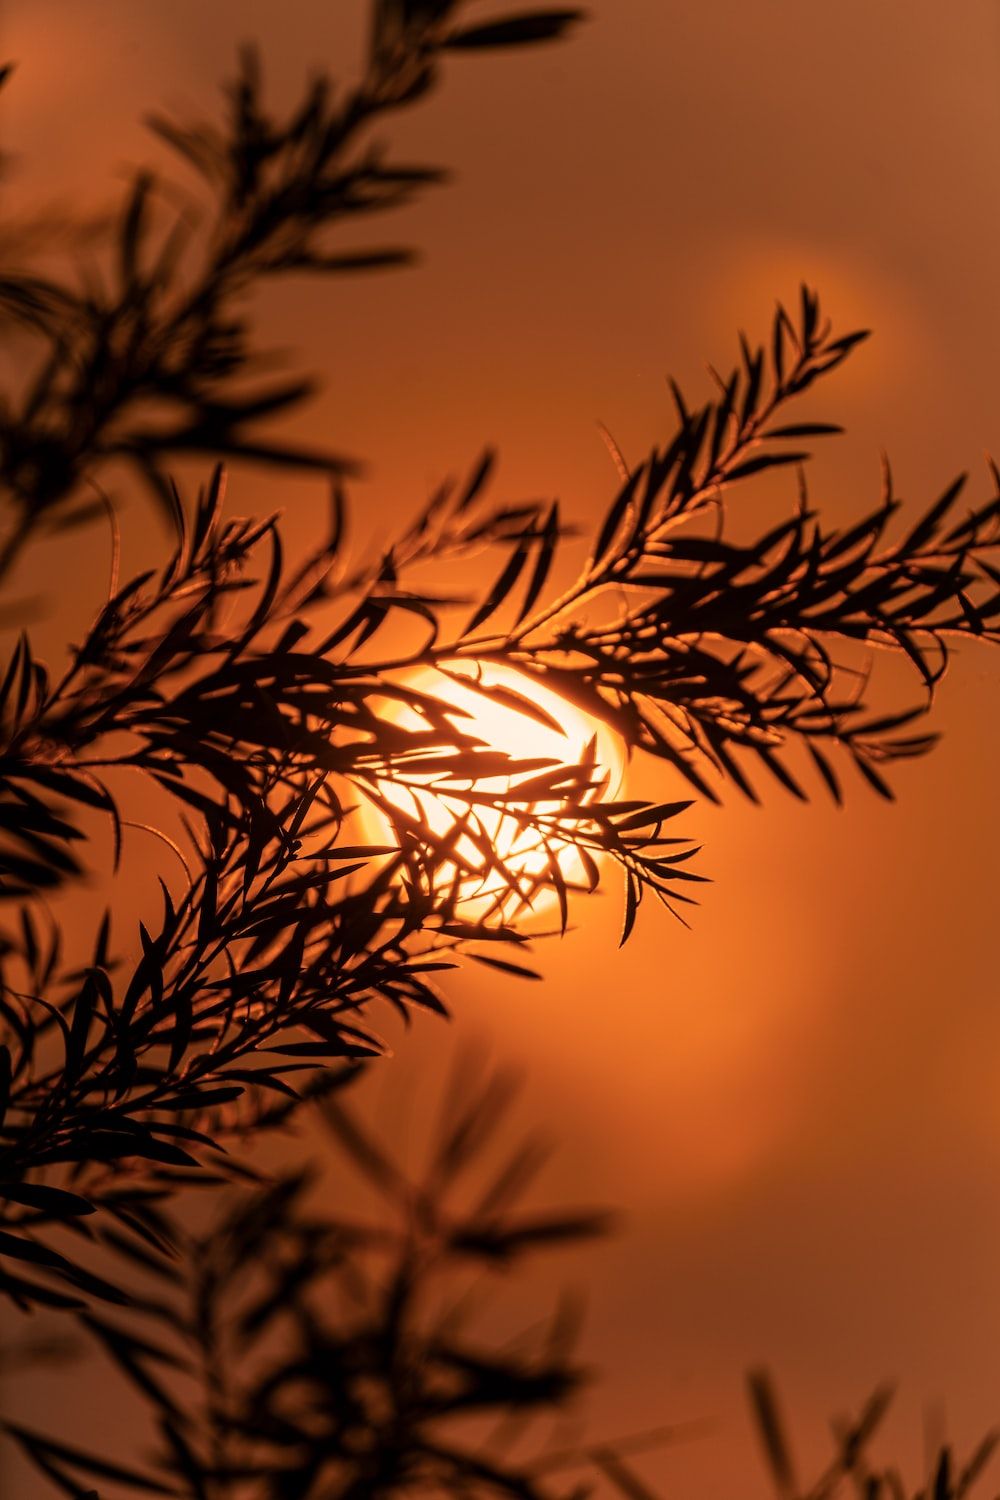 A sunset is seen through the branches of trees - Dark orange